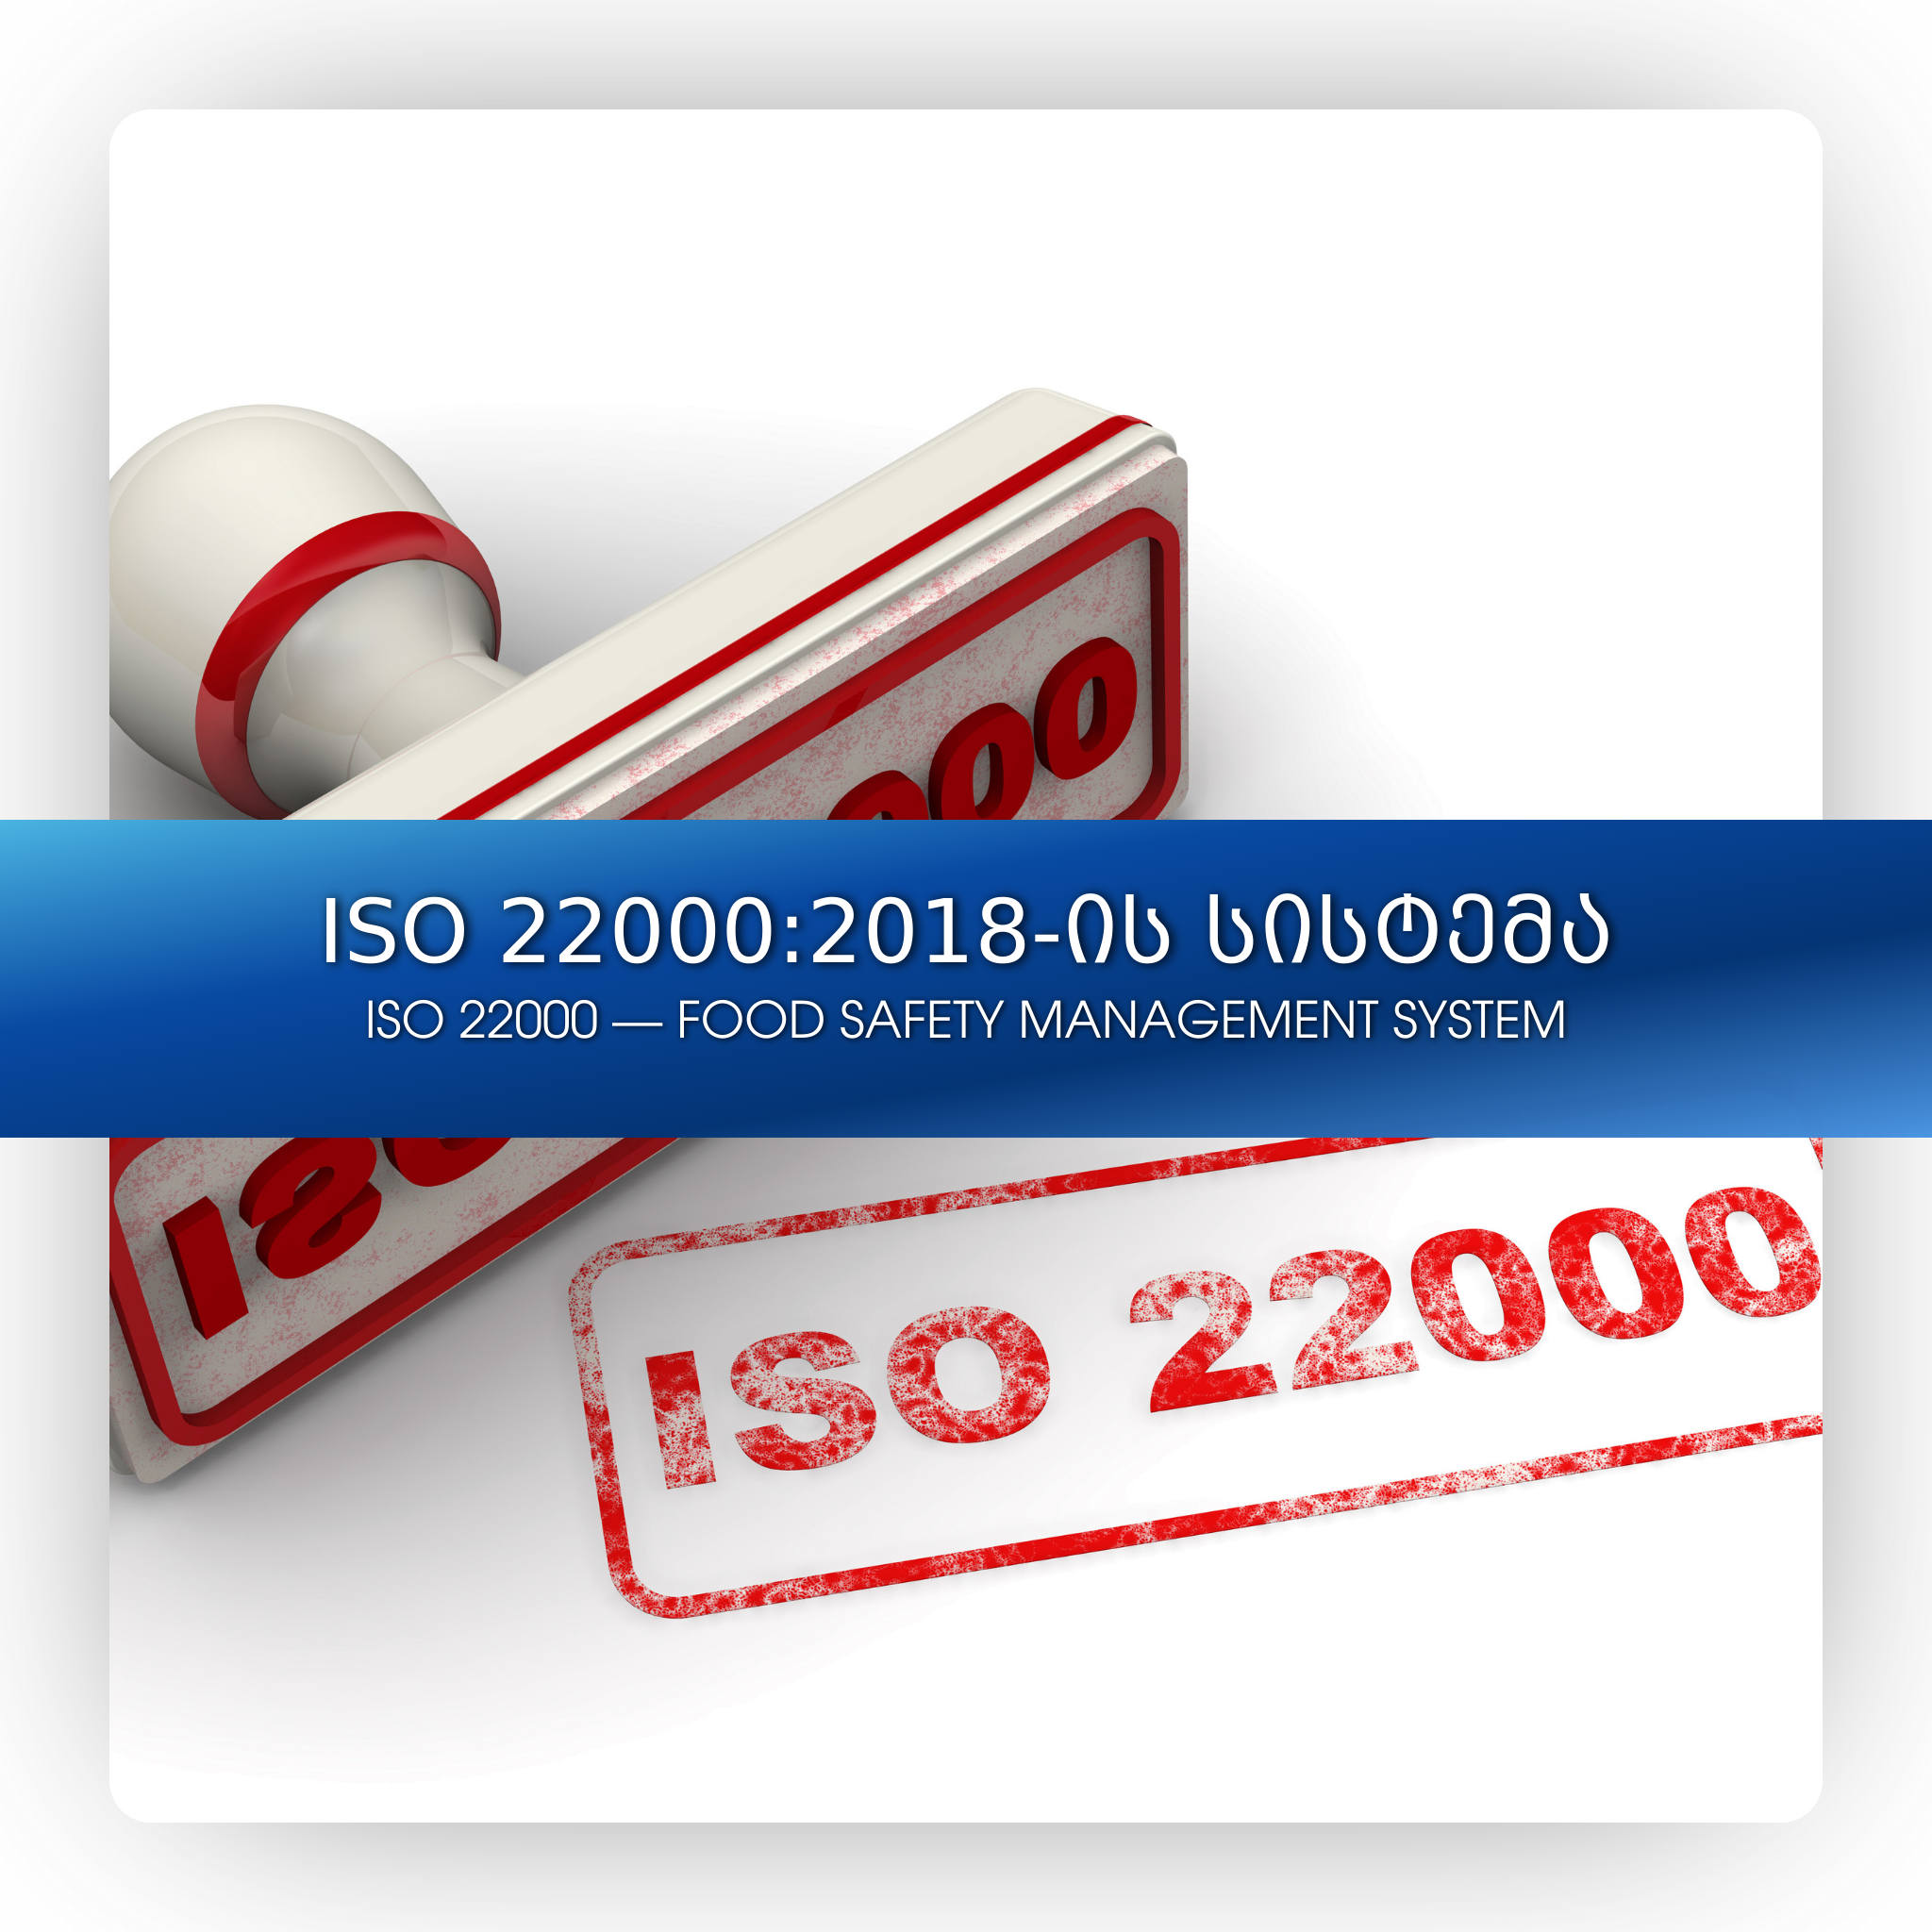 ISO 22000 — Food Safety Management System